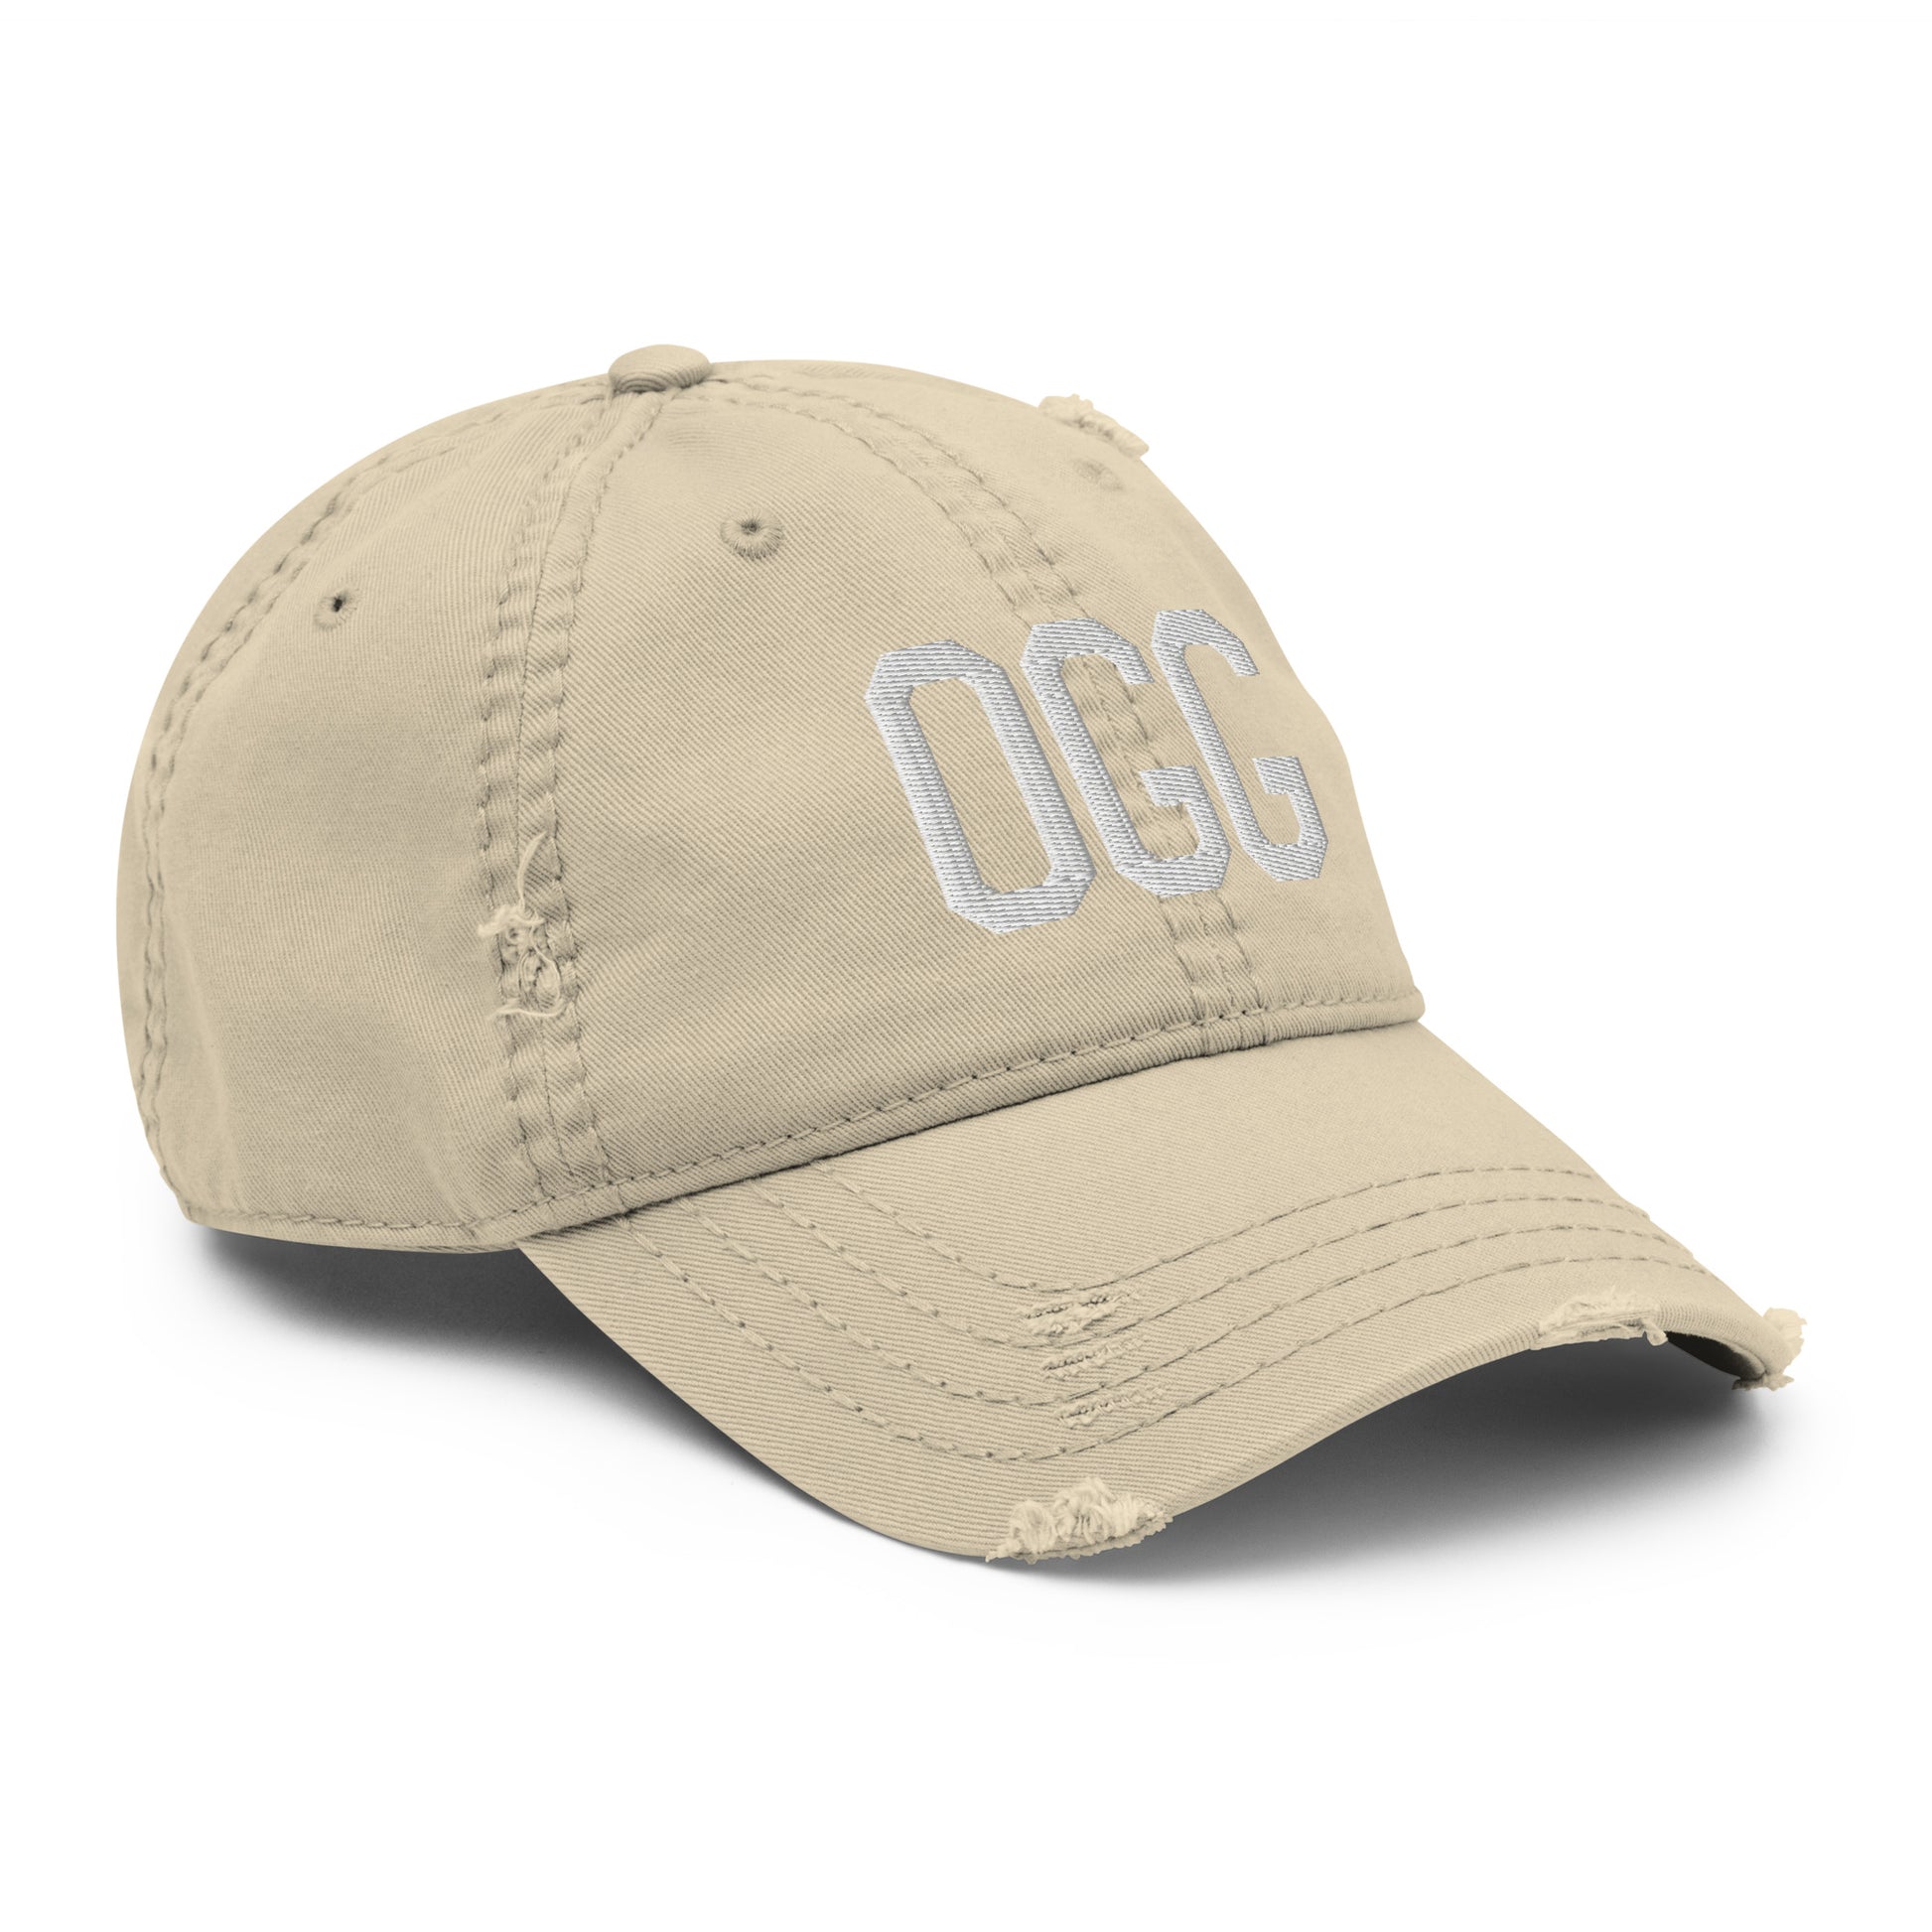 Airport Code Distressed Hat - White • OGG Maui • YHM Designs - Image 20